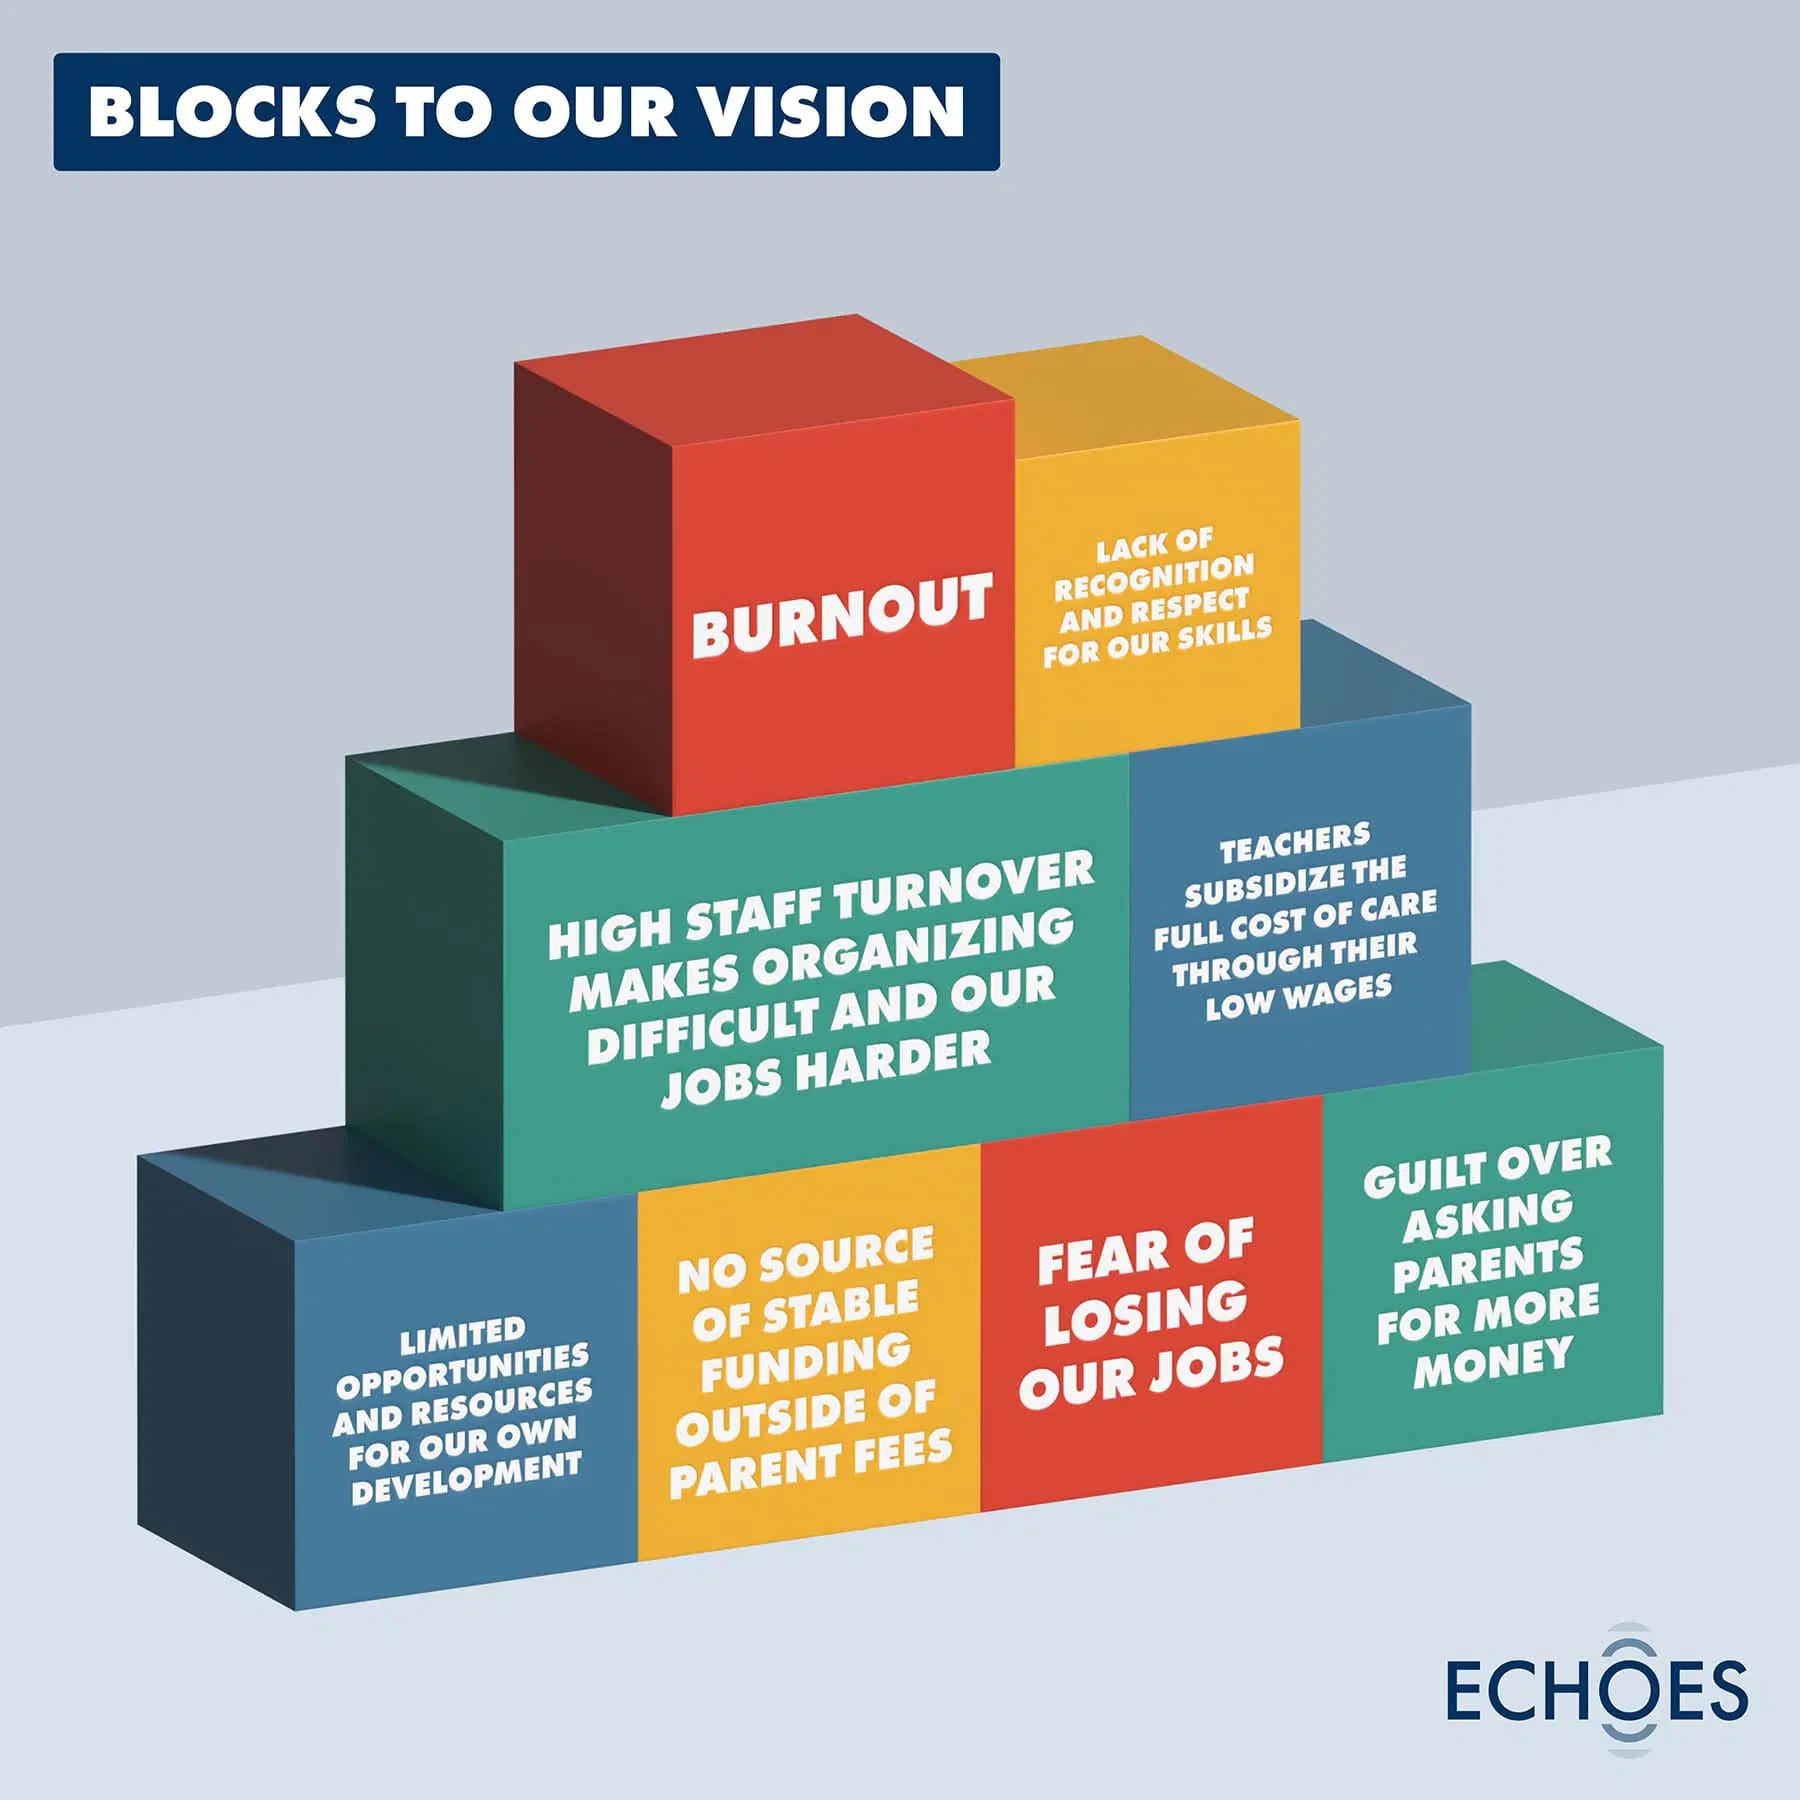 Echoes Block To Our Vision@2x 100